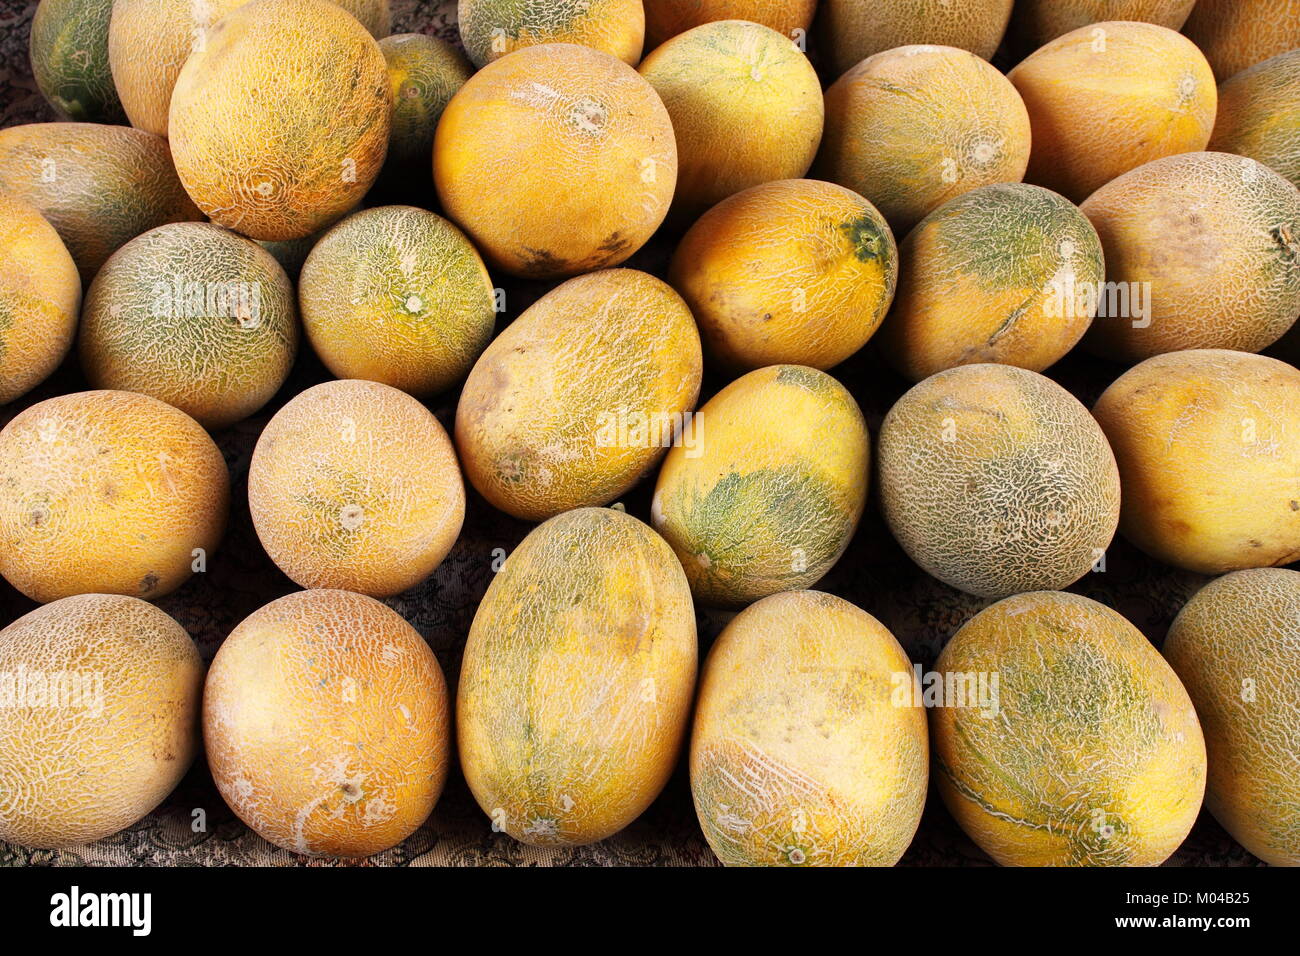 Fresh yellow melons displayed in a greengrocery Stock Photo